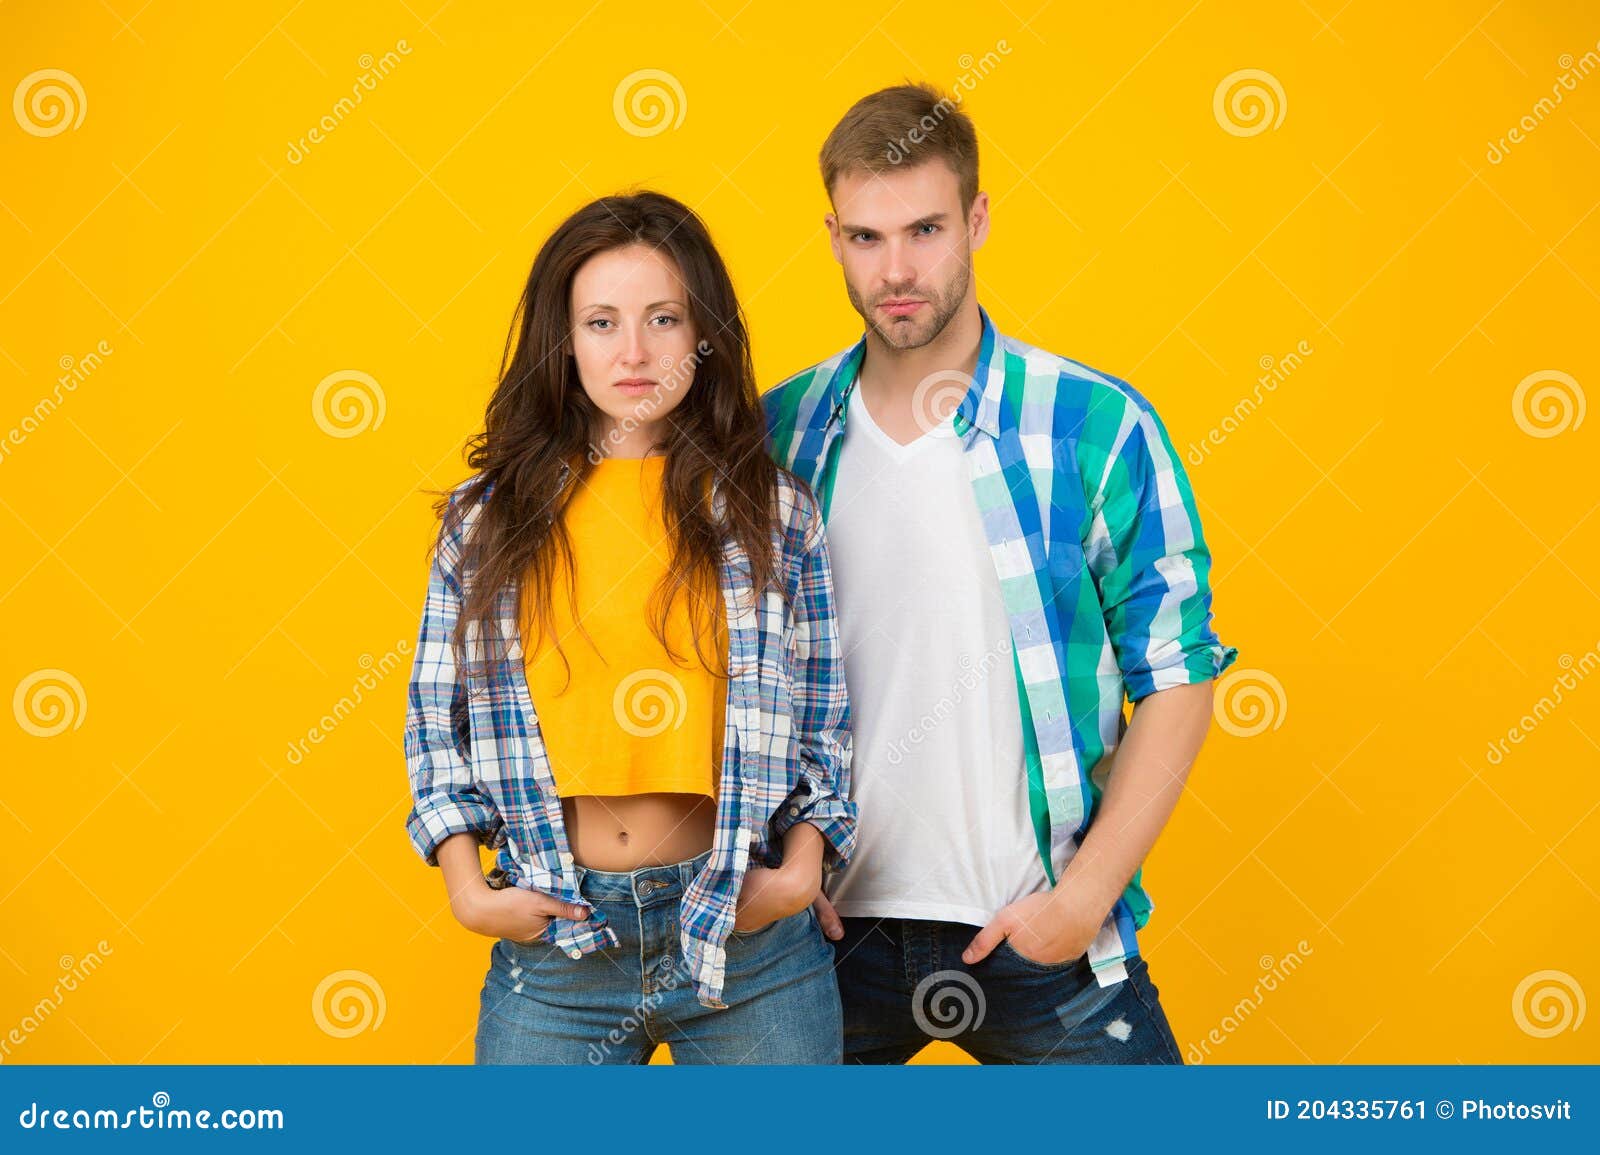 Their Style is a Lot More Casual. Couple in Casual Wear. Vogue Models  Yellow Background. Fashion Clothes Stock Image - Image of model, casual:  204335761